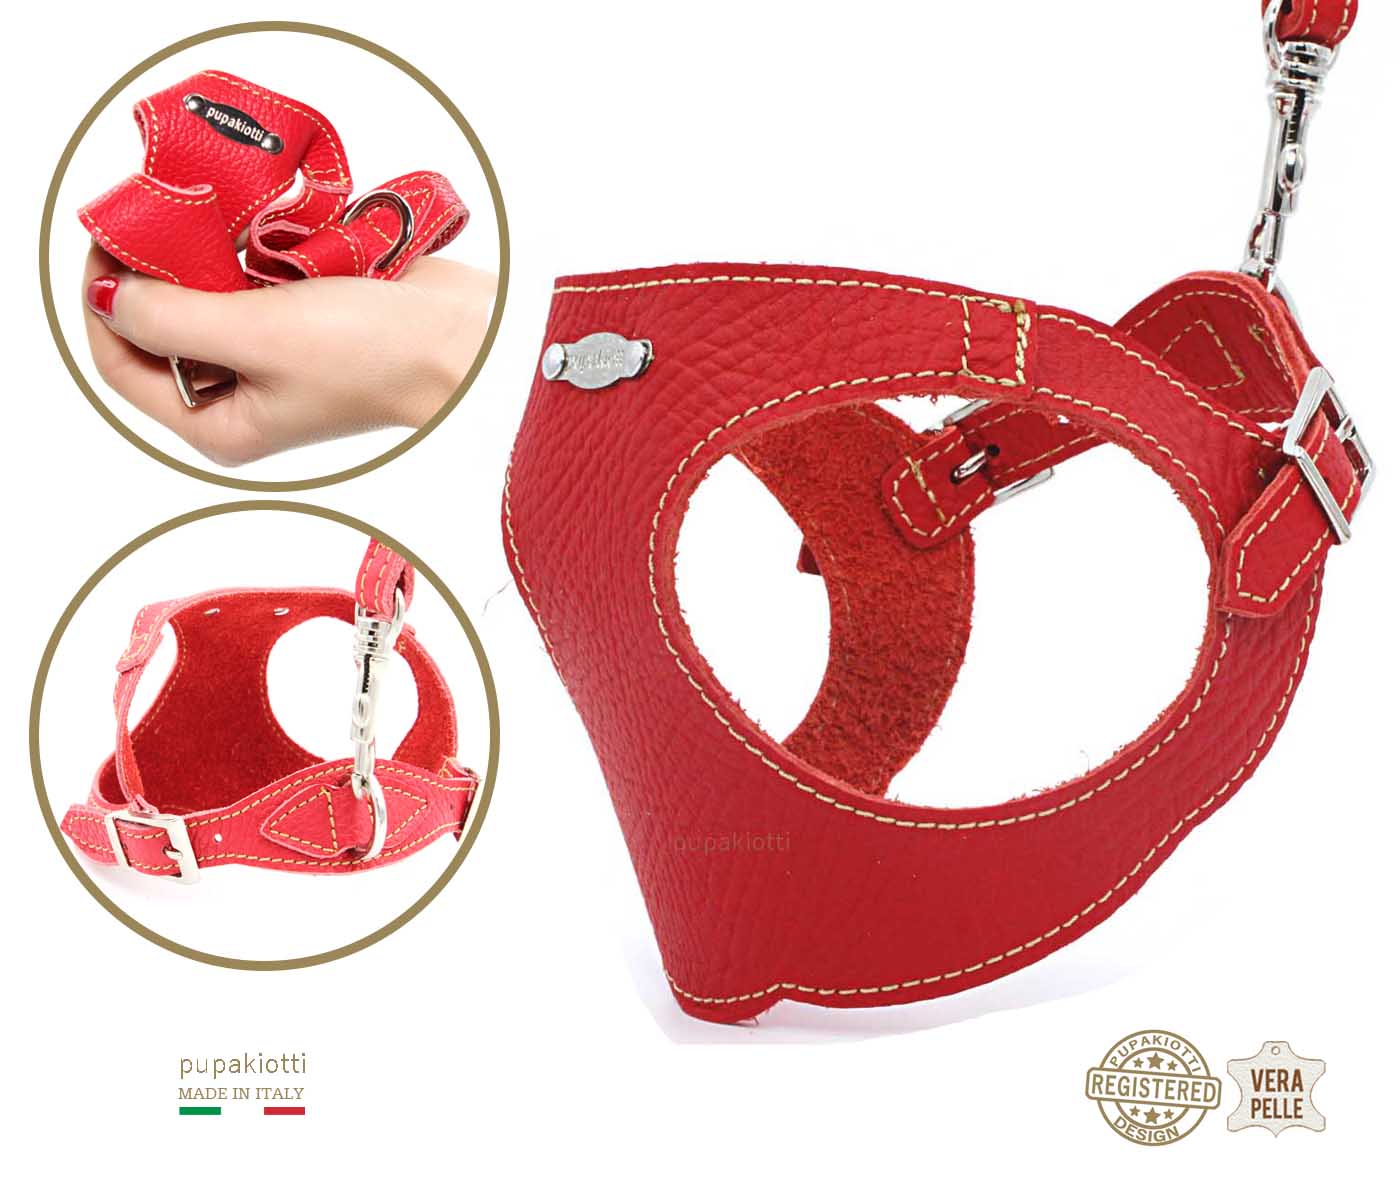 Basic. Set 3 pcs. Leather harness and leash with waste bags dispenser